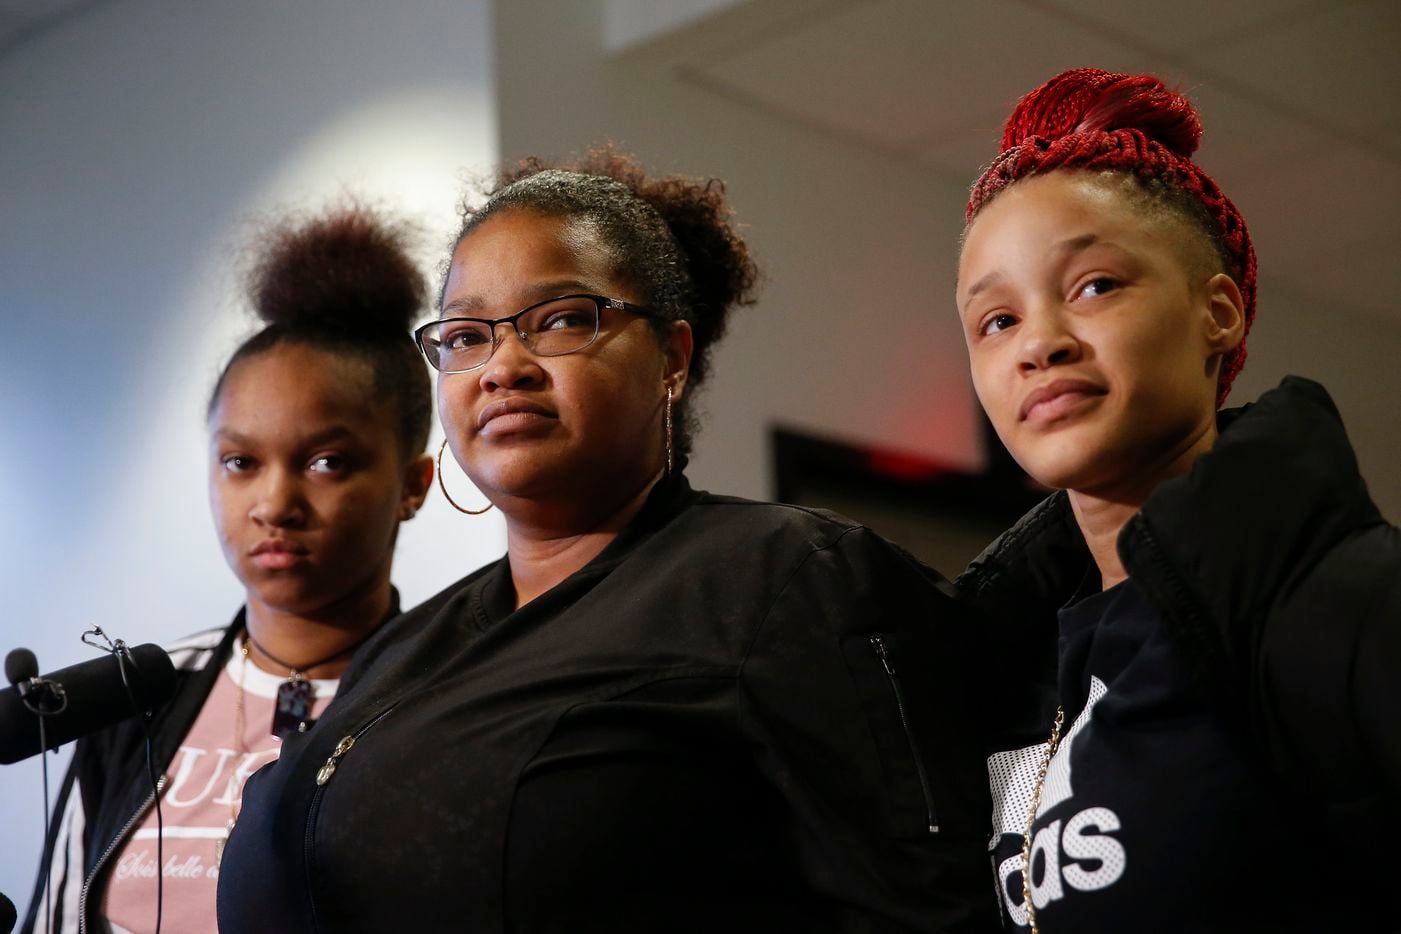 Shaquana Persley (center) and daughters Kayla Randle (left) and Shiniece Richards speak to media after Desmond Jones was sentenced to 99 years in prison for engaging in organized criminal activity. (Ryan Michalesko/The Dallas Morning News)